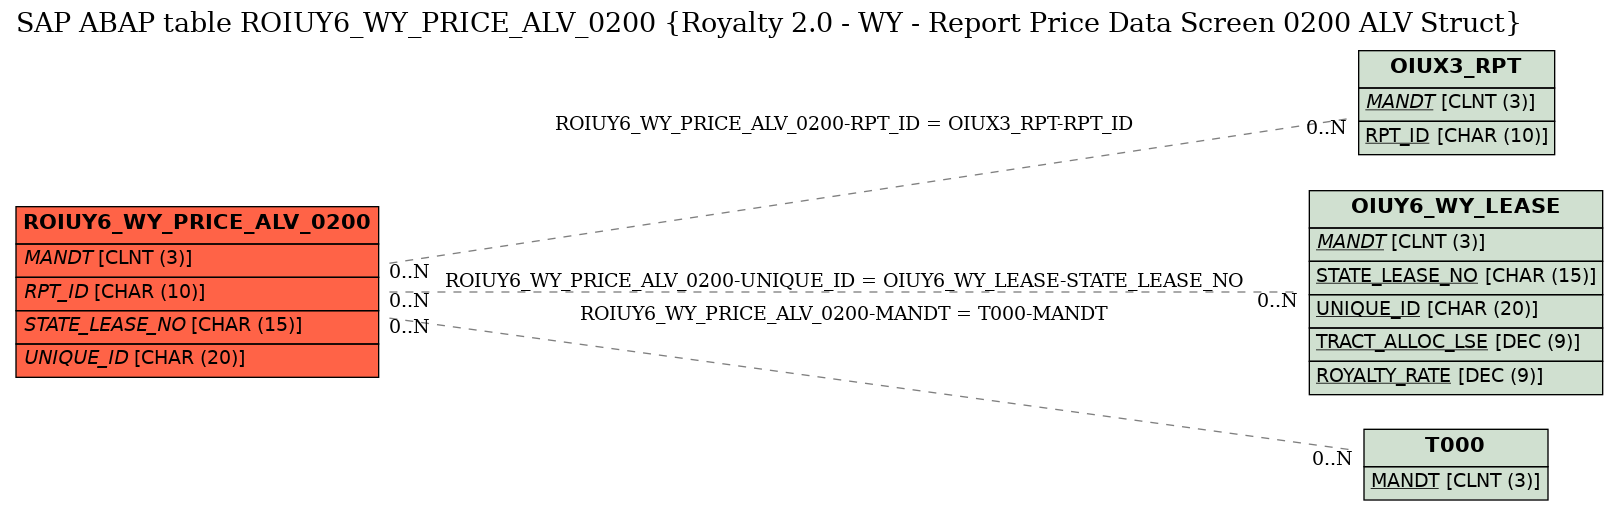 E-R Diagram for table ROIUY6_WY_PRICE_ALV_0200 (Royalty 2.0 - WY - Report Price Data Screen 0200 ALV Struct)